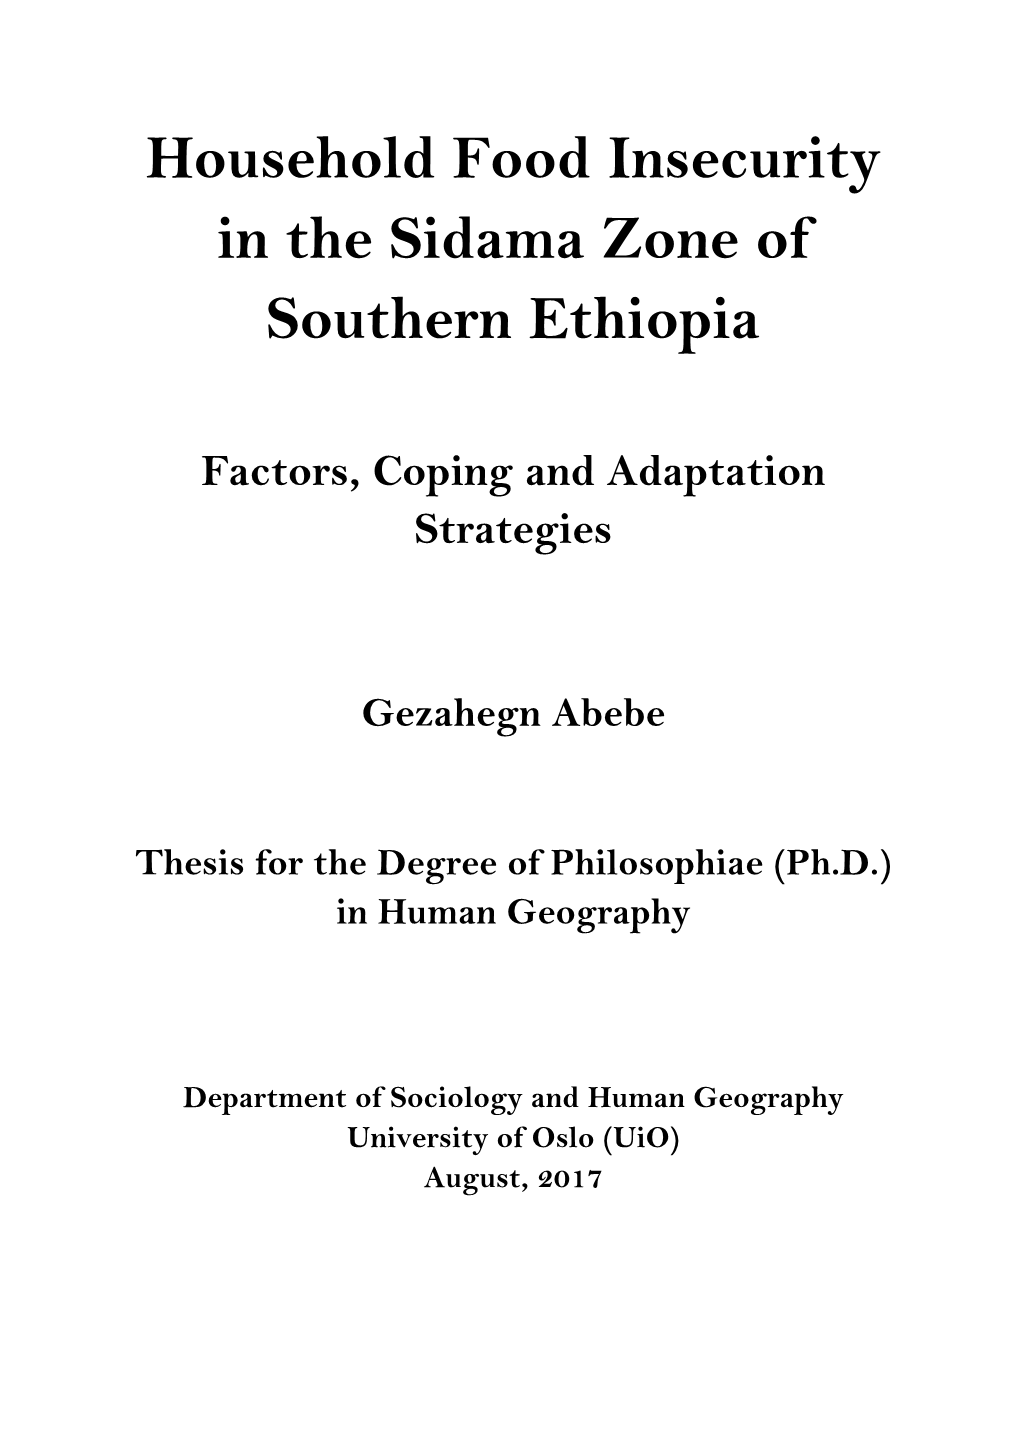 Household Food Insecurity in the Sidama Zone of Southern Ethiopia